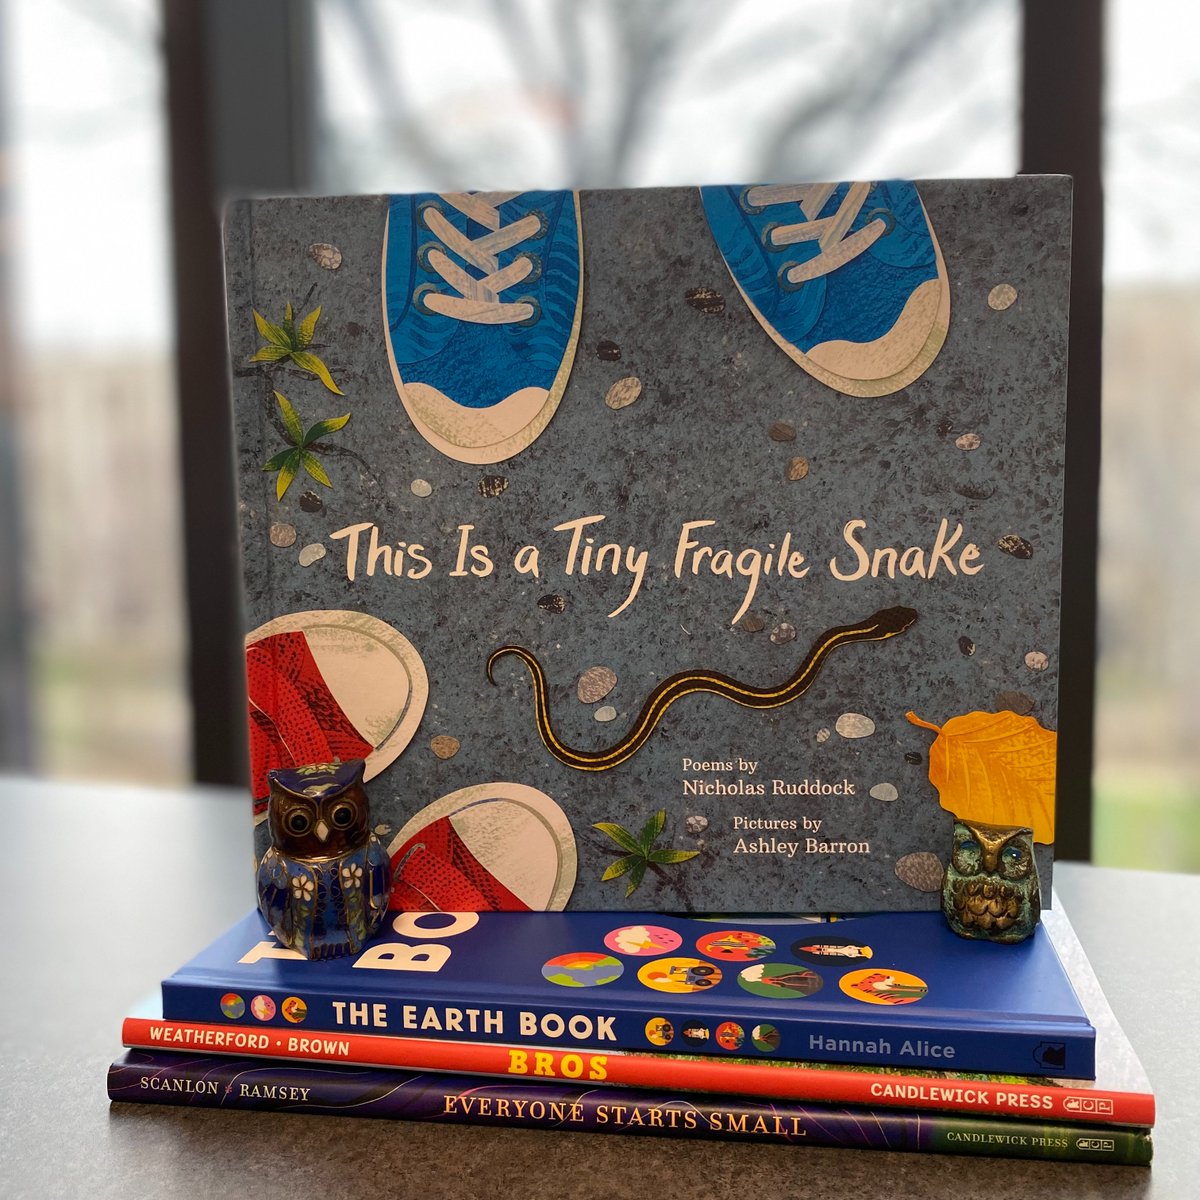 📚🐍This Is A Tiny Fragile Snake by Nicholas Ruddock and Ashley Barron. #dailybutlershelfie #thisisatinyfragilesnake #nicholasruddock @Ashley__Barron @GroundwoodBooks